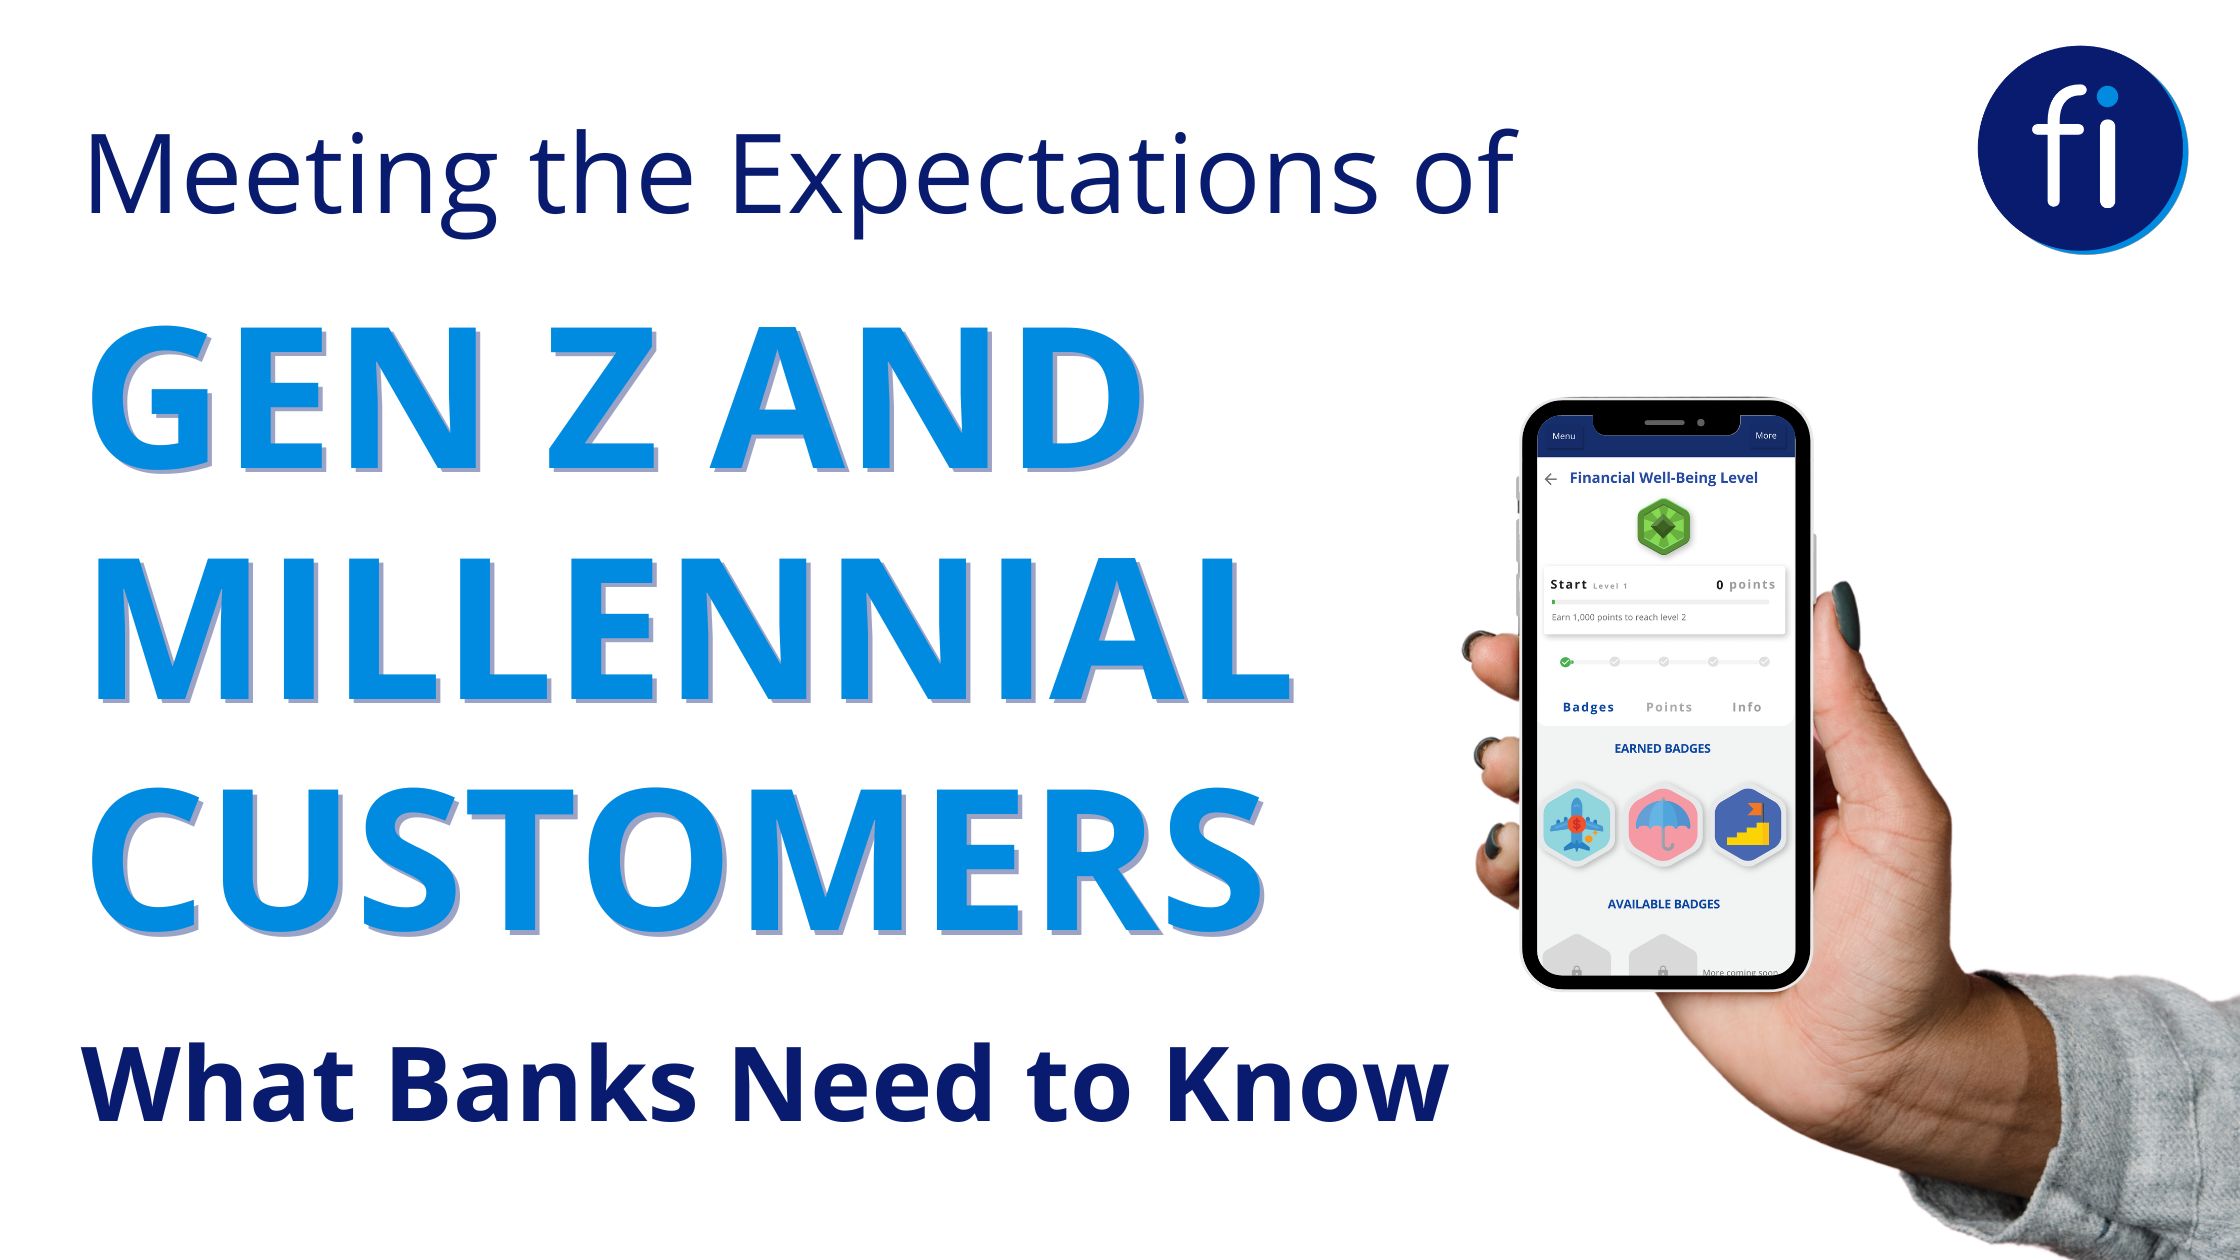 Meeting the Expectations of Gen Z and Millennial Customers: What Banks Need to Know